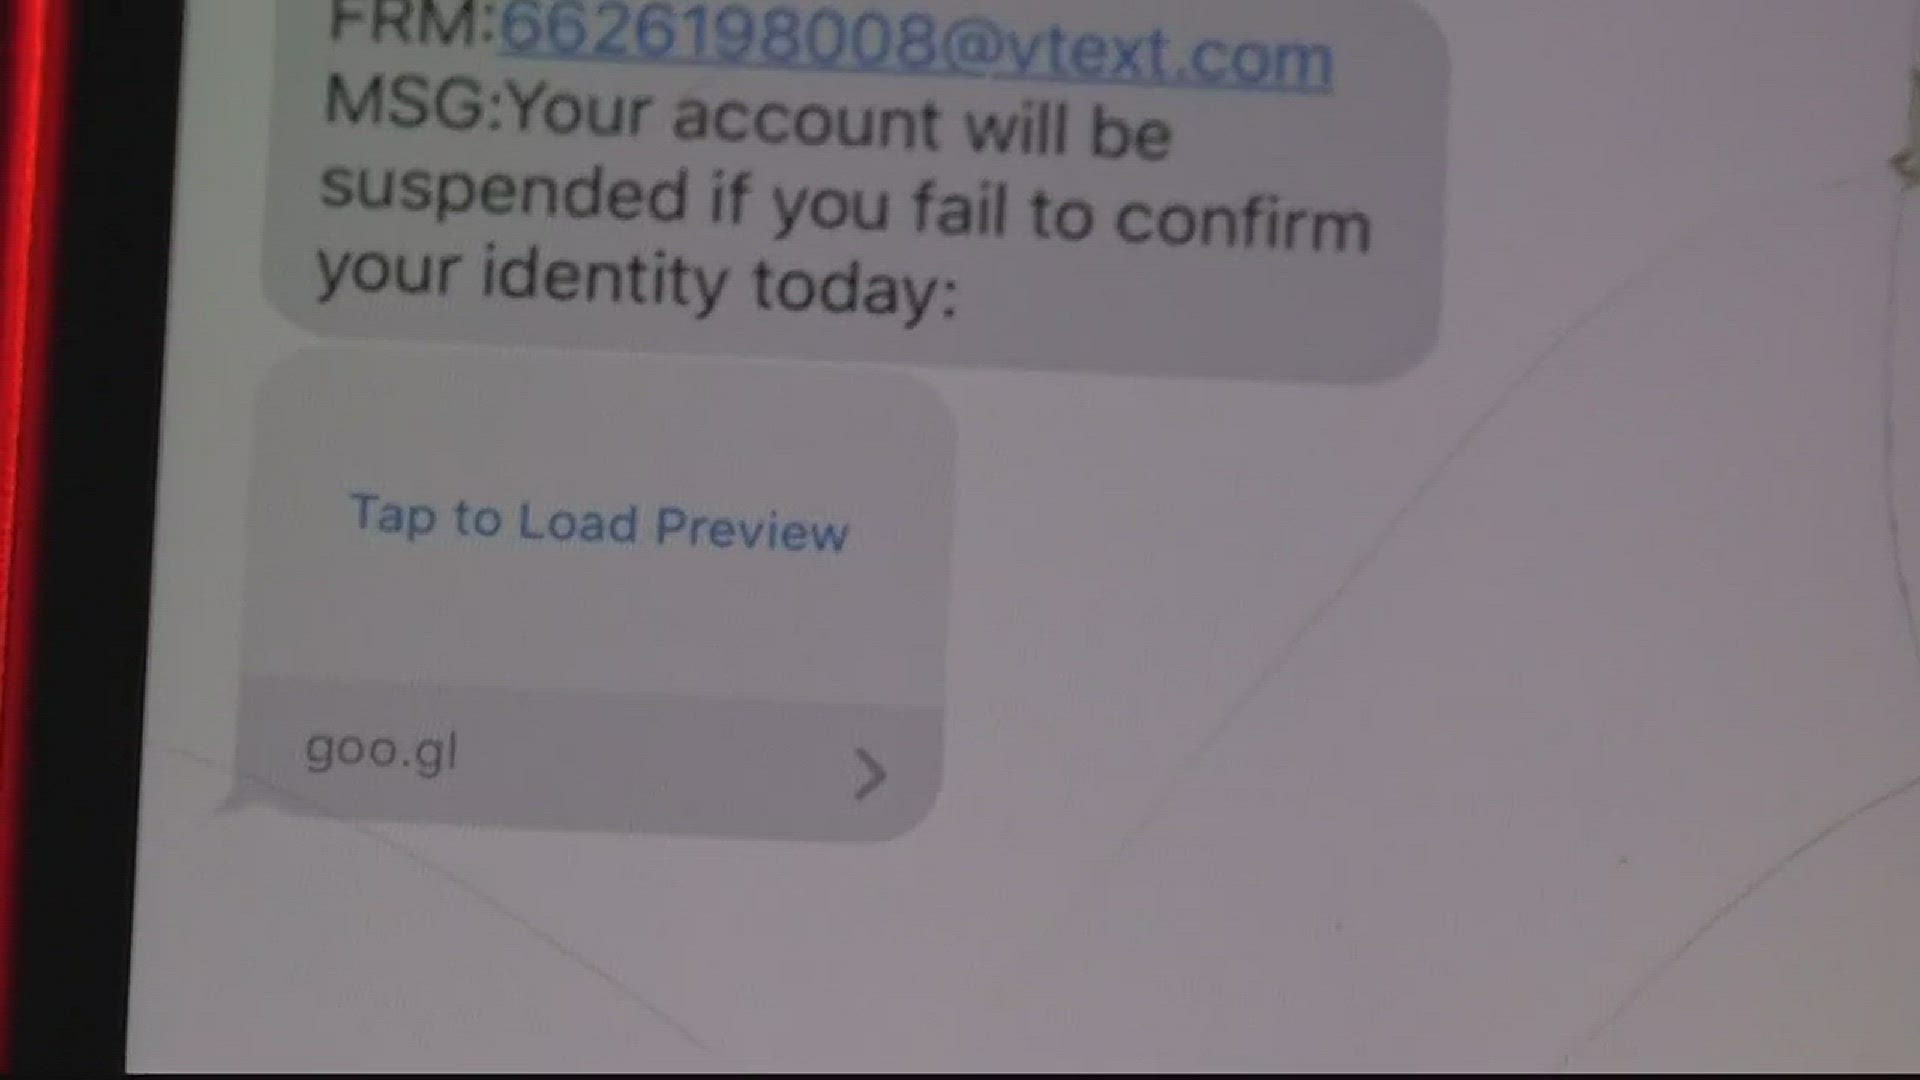 SRP customers are being targeted by scam text messages to pay up or have their service suspended.